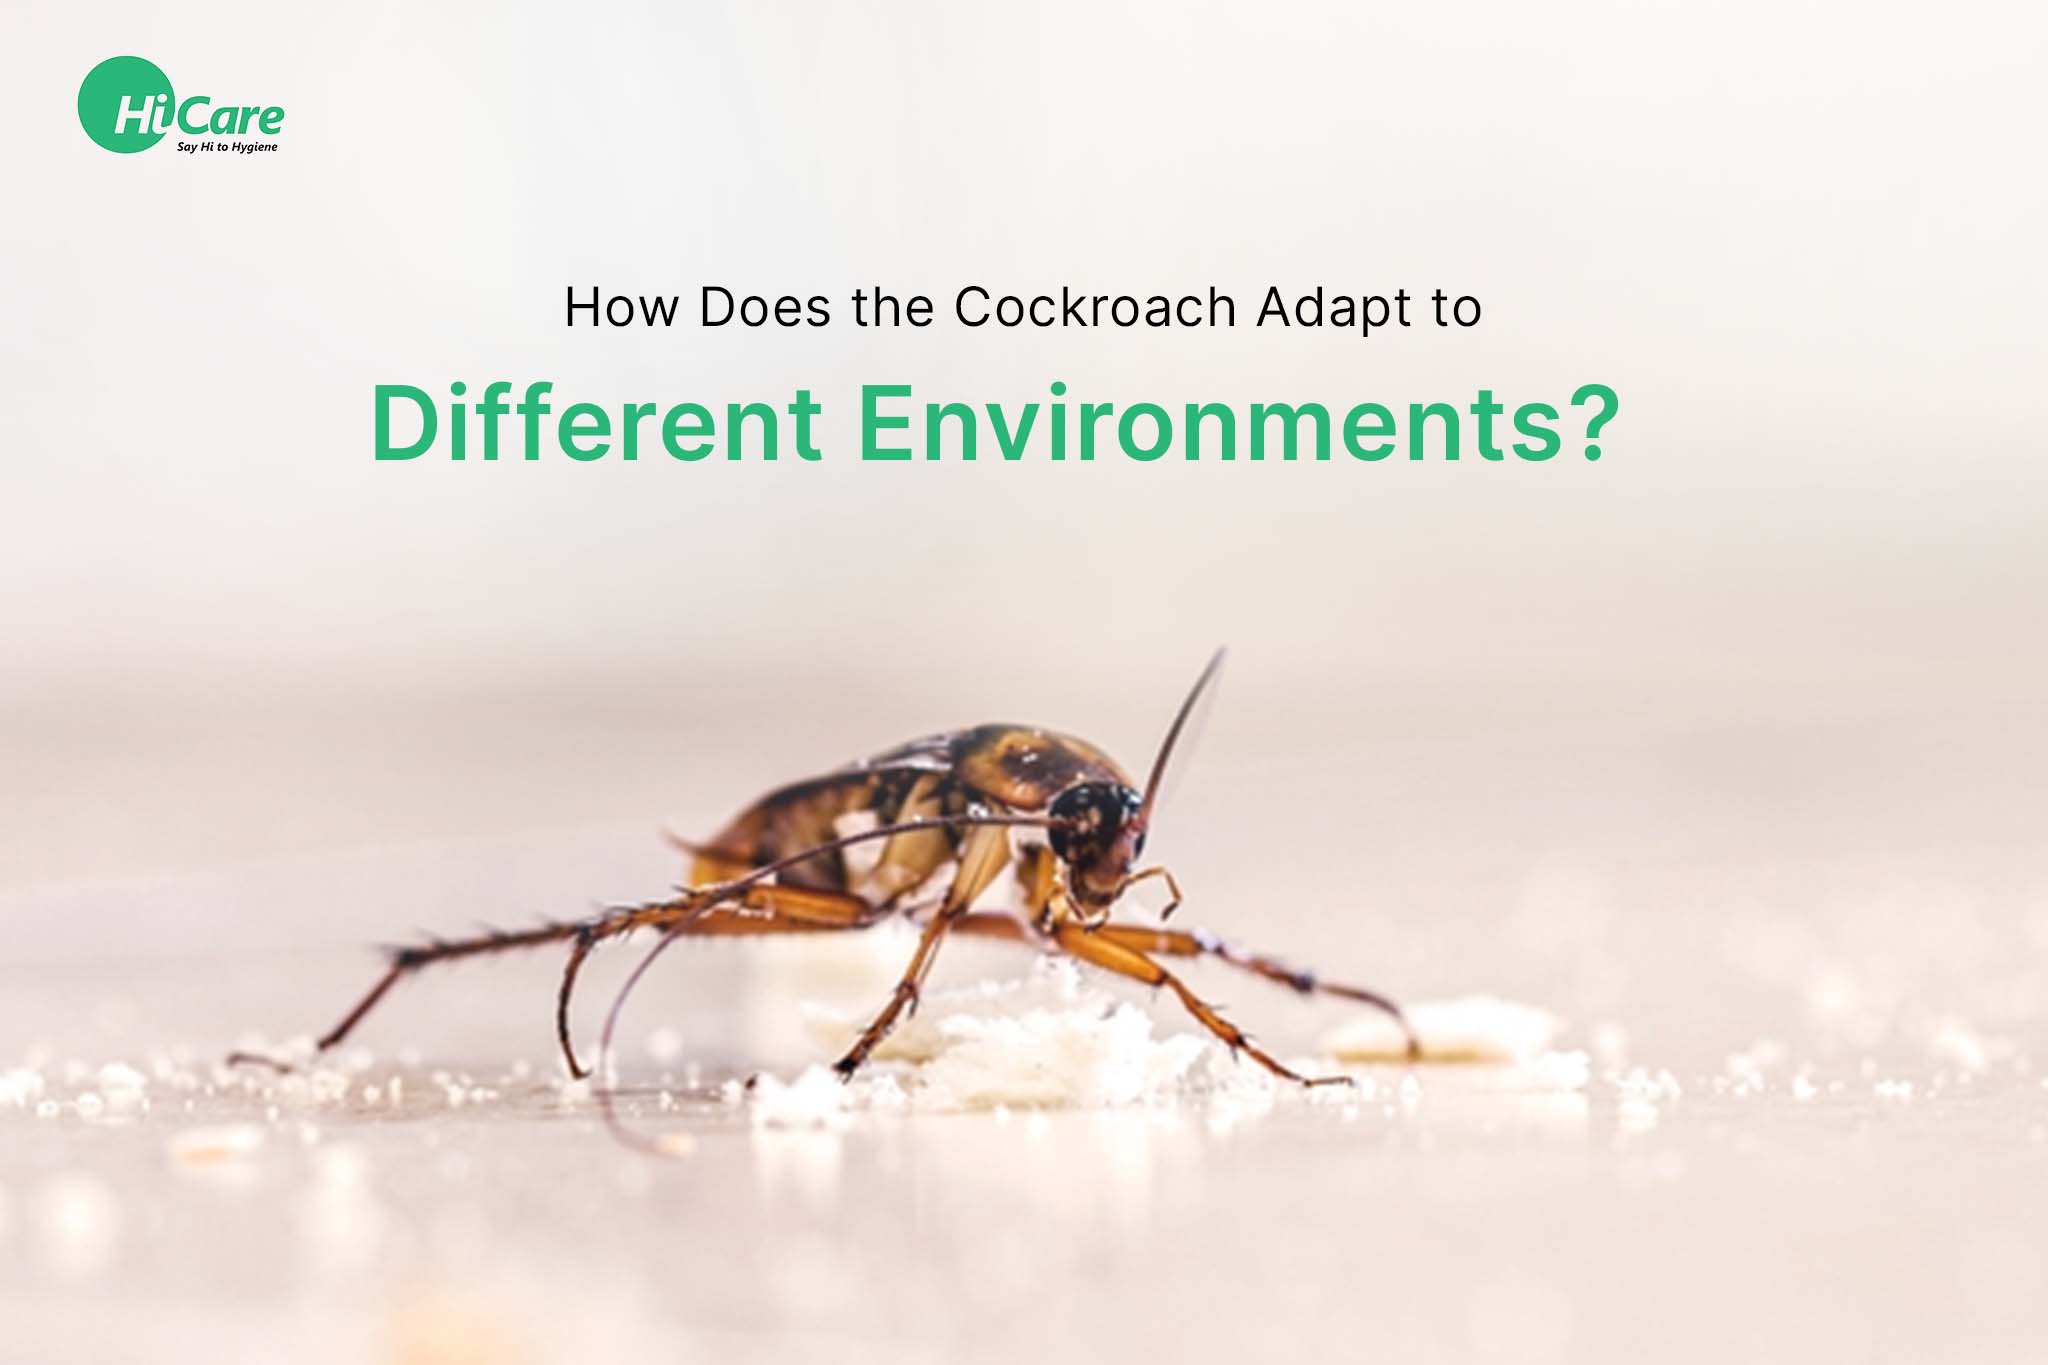 How Does the Cockroach Adapt to Different Environments?